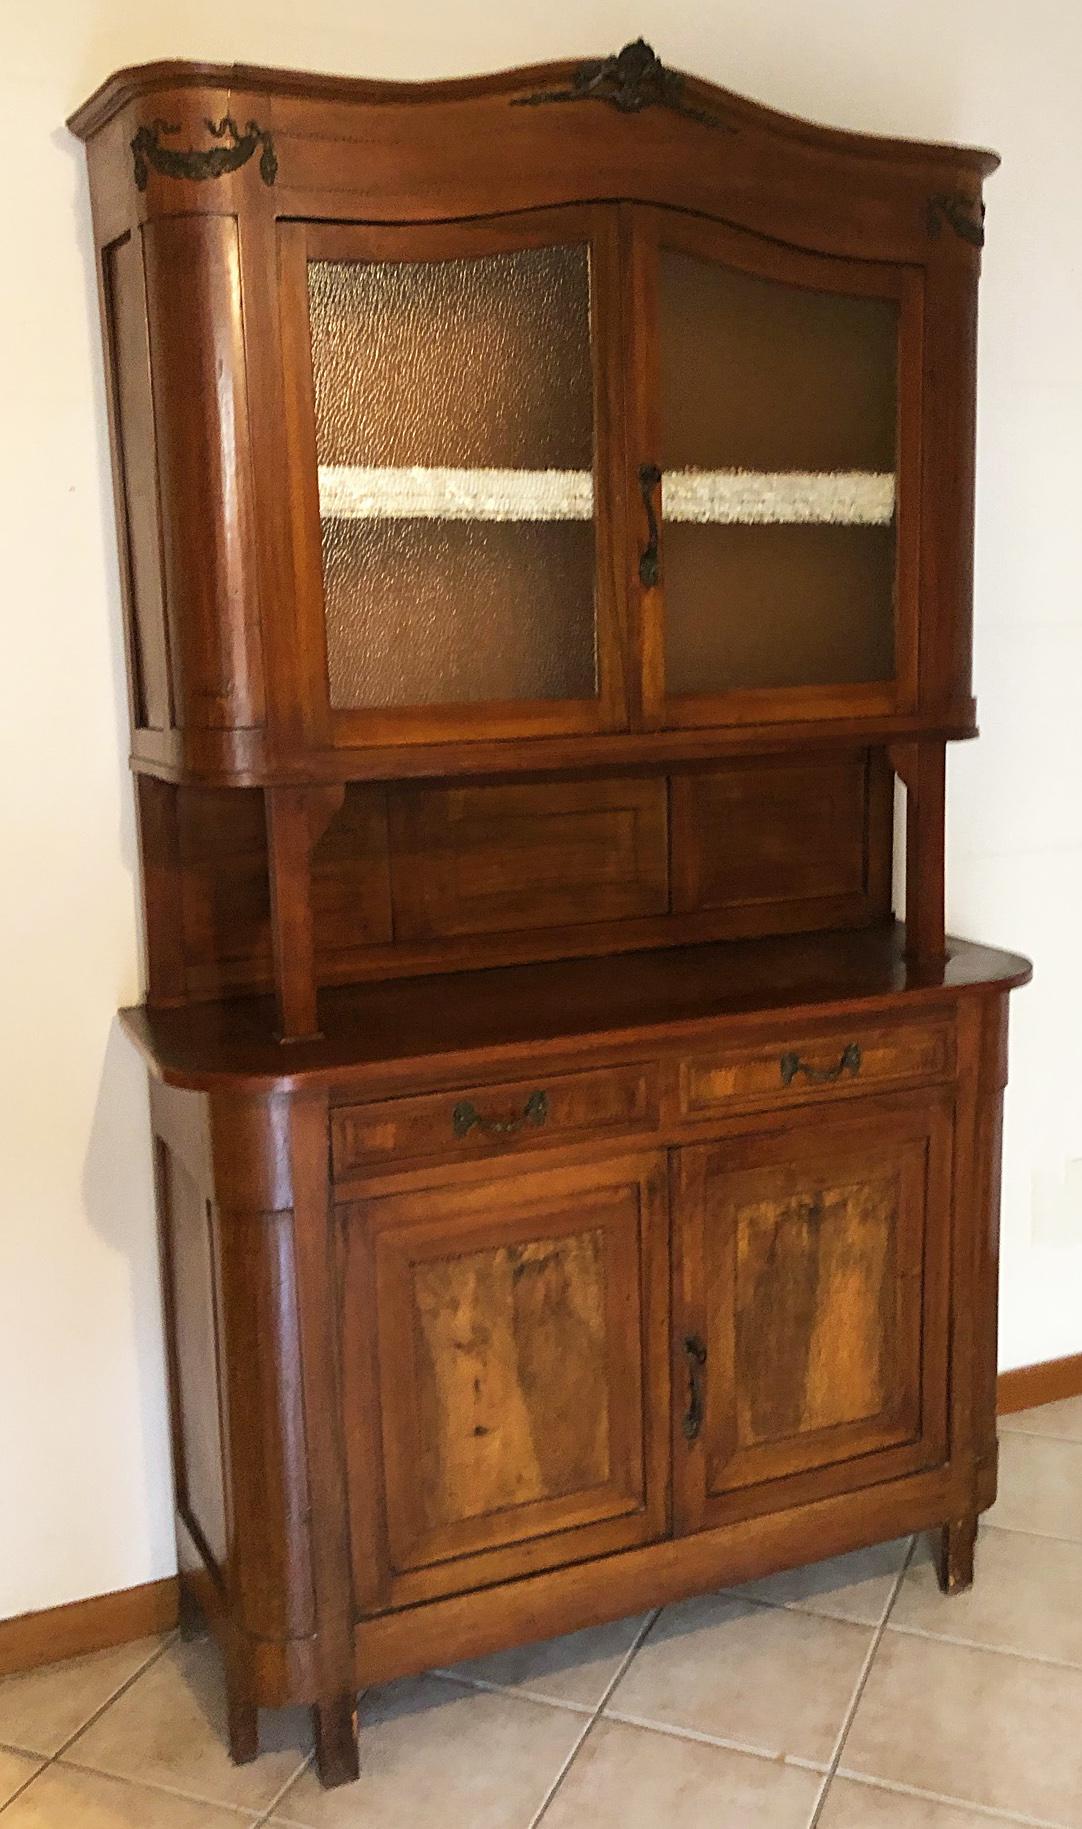 Cabinets Italian showcase in national walnut in natural color art deco style 2.
The piece of furniture is divided into two parts, the upper one with two glass and the lower one with drawers and doors with internal shelf.
Original handles. 
All